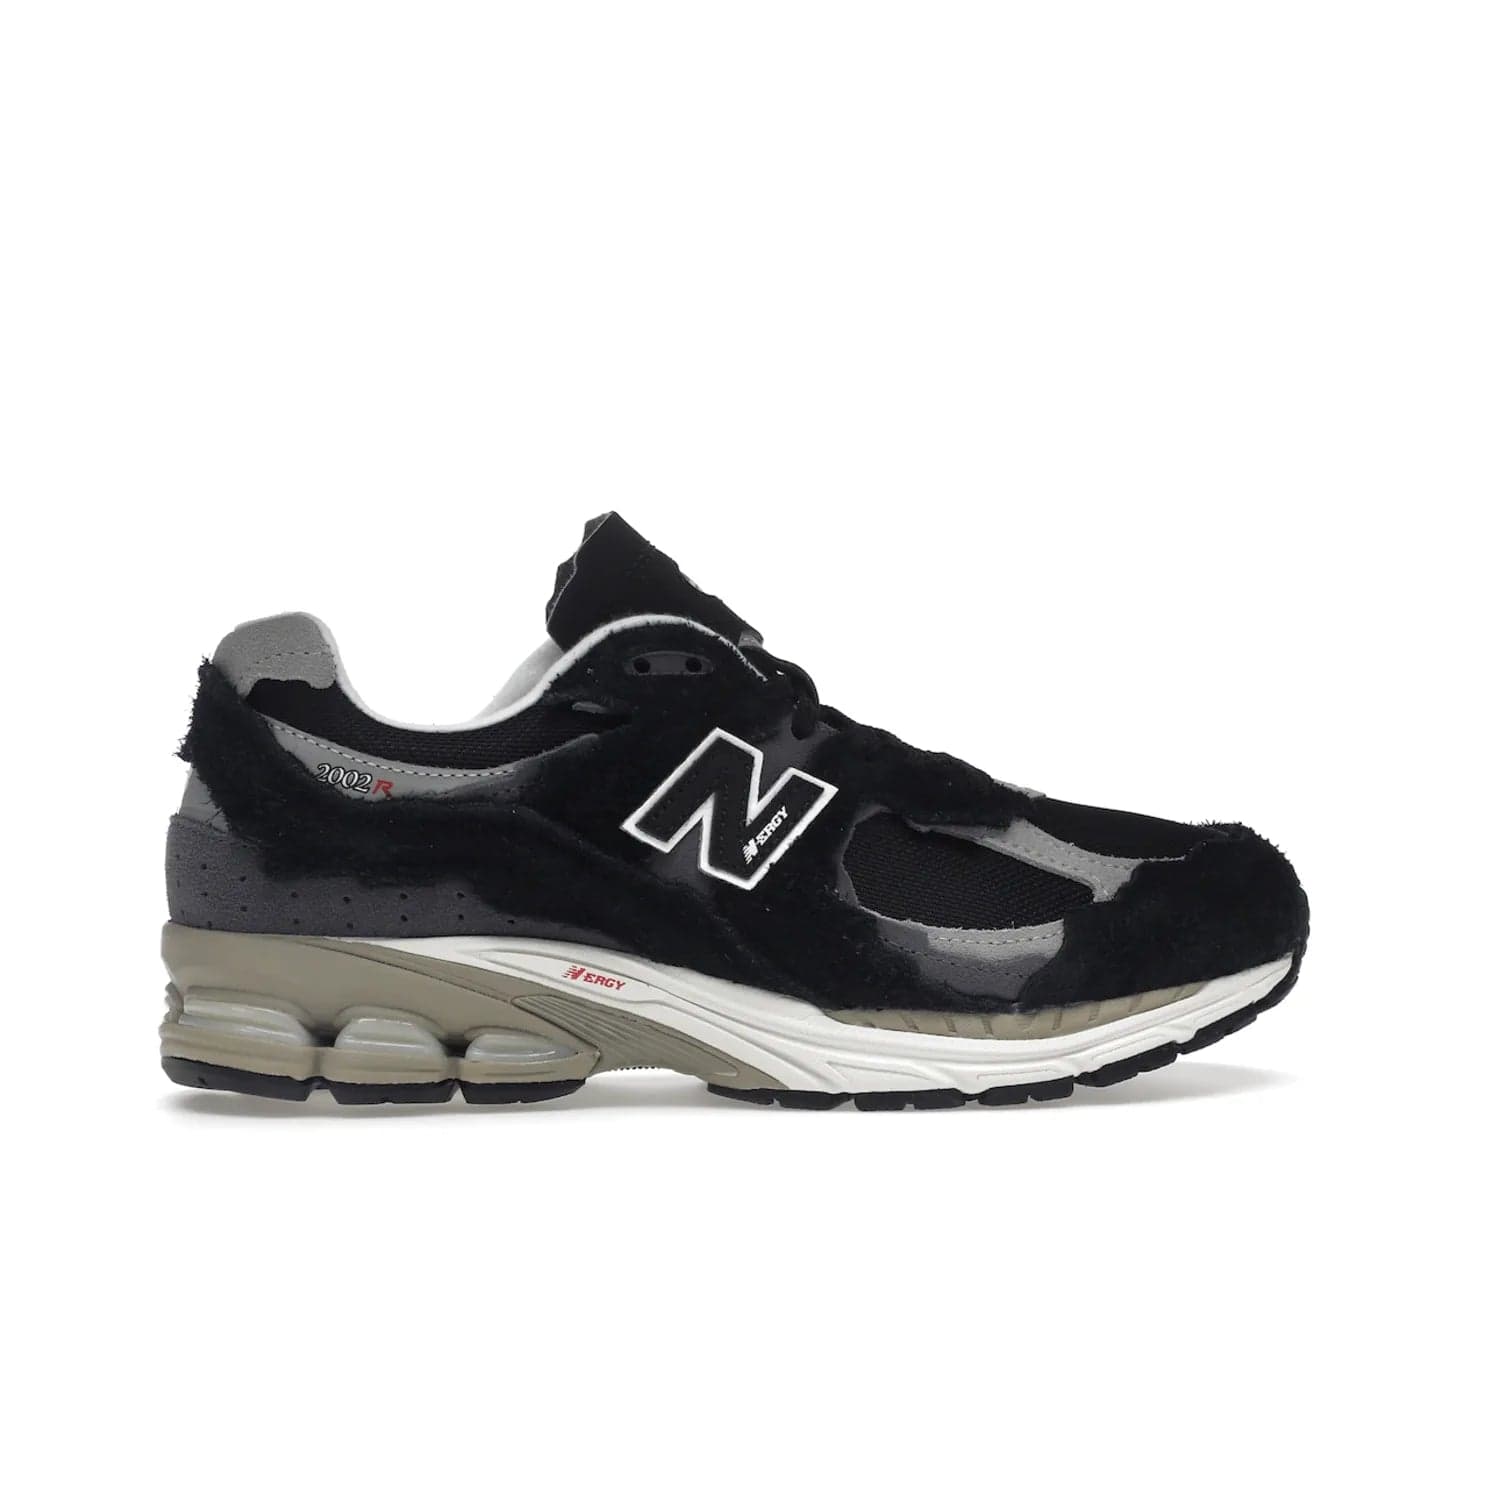 New Balance 2002R Protection Pack Black Grey - Image 36 - Only at www.BallersClubKickz.com - Look stylish in the New Balance 2002R Protection Pack Black Grey. Uppers constructed from premium materials like mesh and synthetic overlays. Iconic "N" emblem appears in white and black. ABZORB midsole for shock absorption and responsiveness. Black outsole for grip and traction. Lacing system offers customized fit and cushioned tongue and collar offer comfort and stability. Step up your style with this must-hav